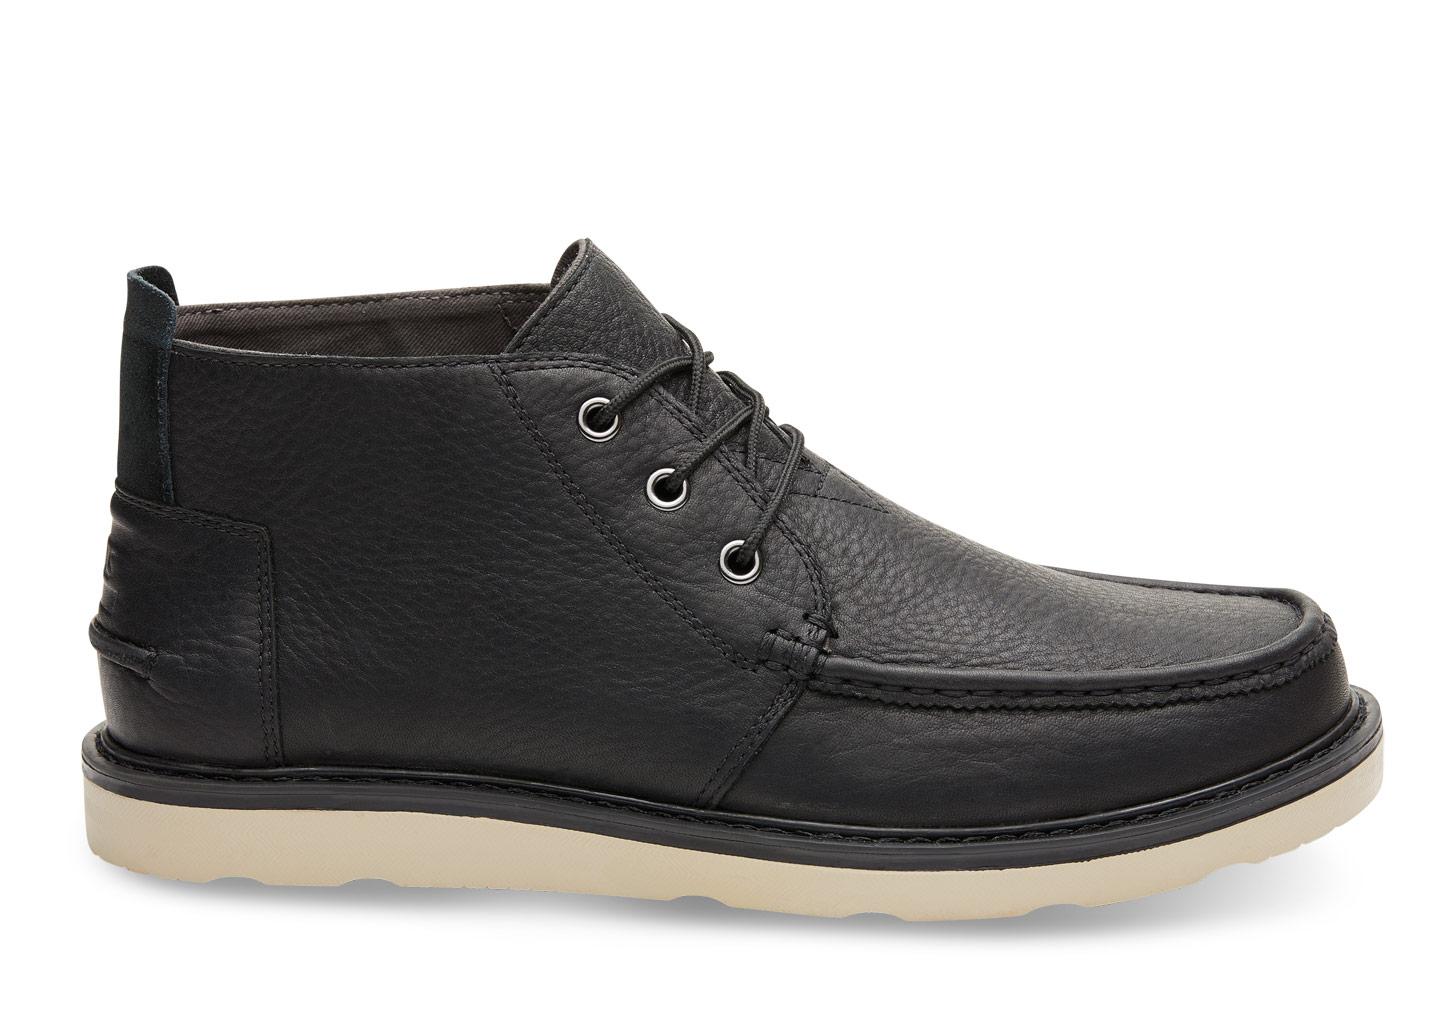 Lyst - TOMS Black Pull-up Leather Men's Chukka Boots in Black for Men ...